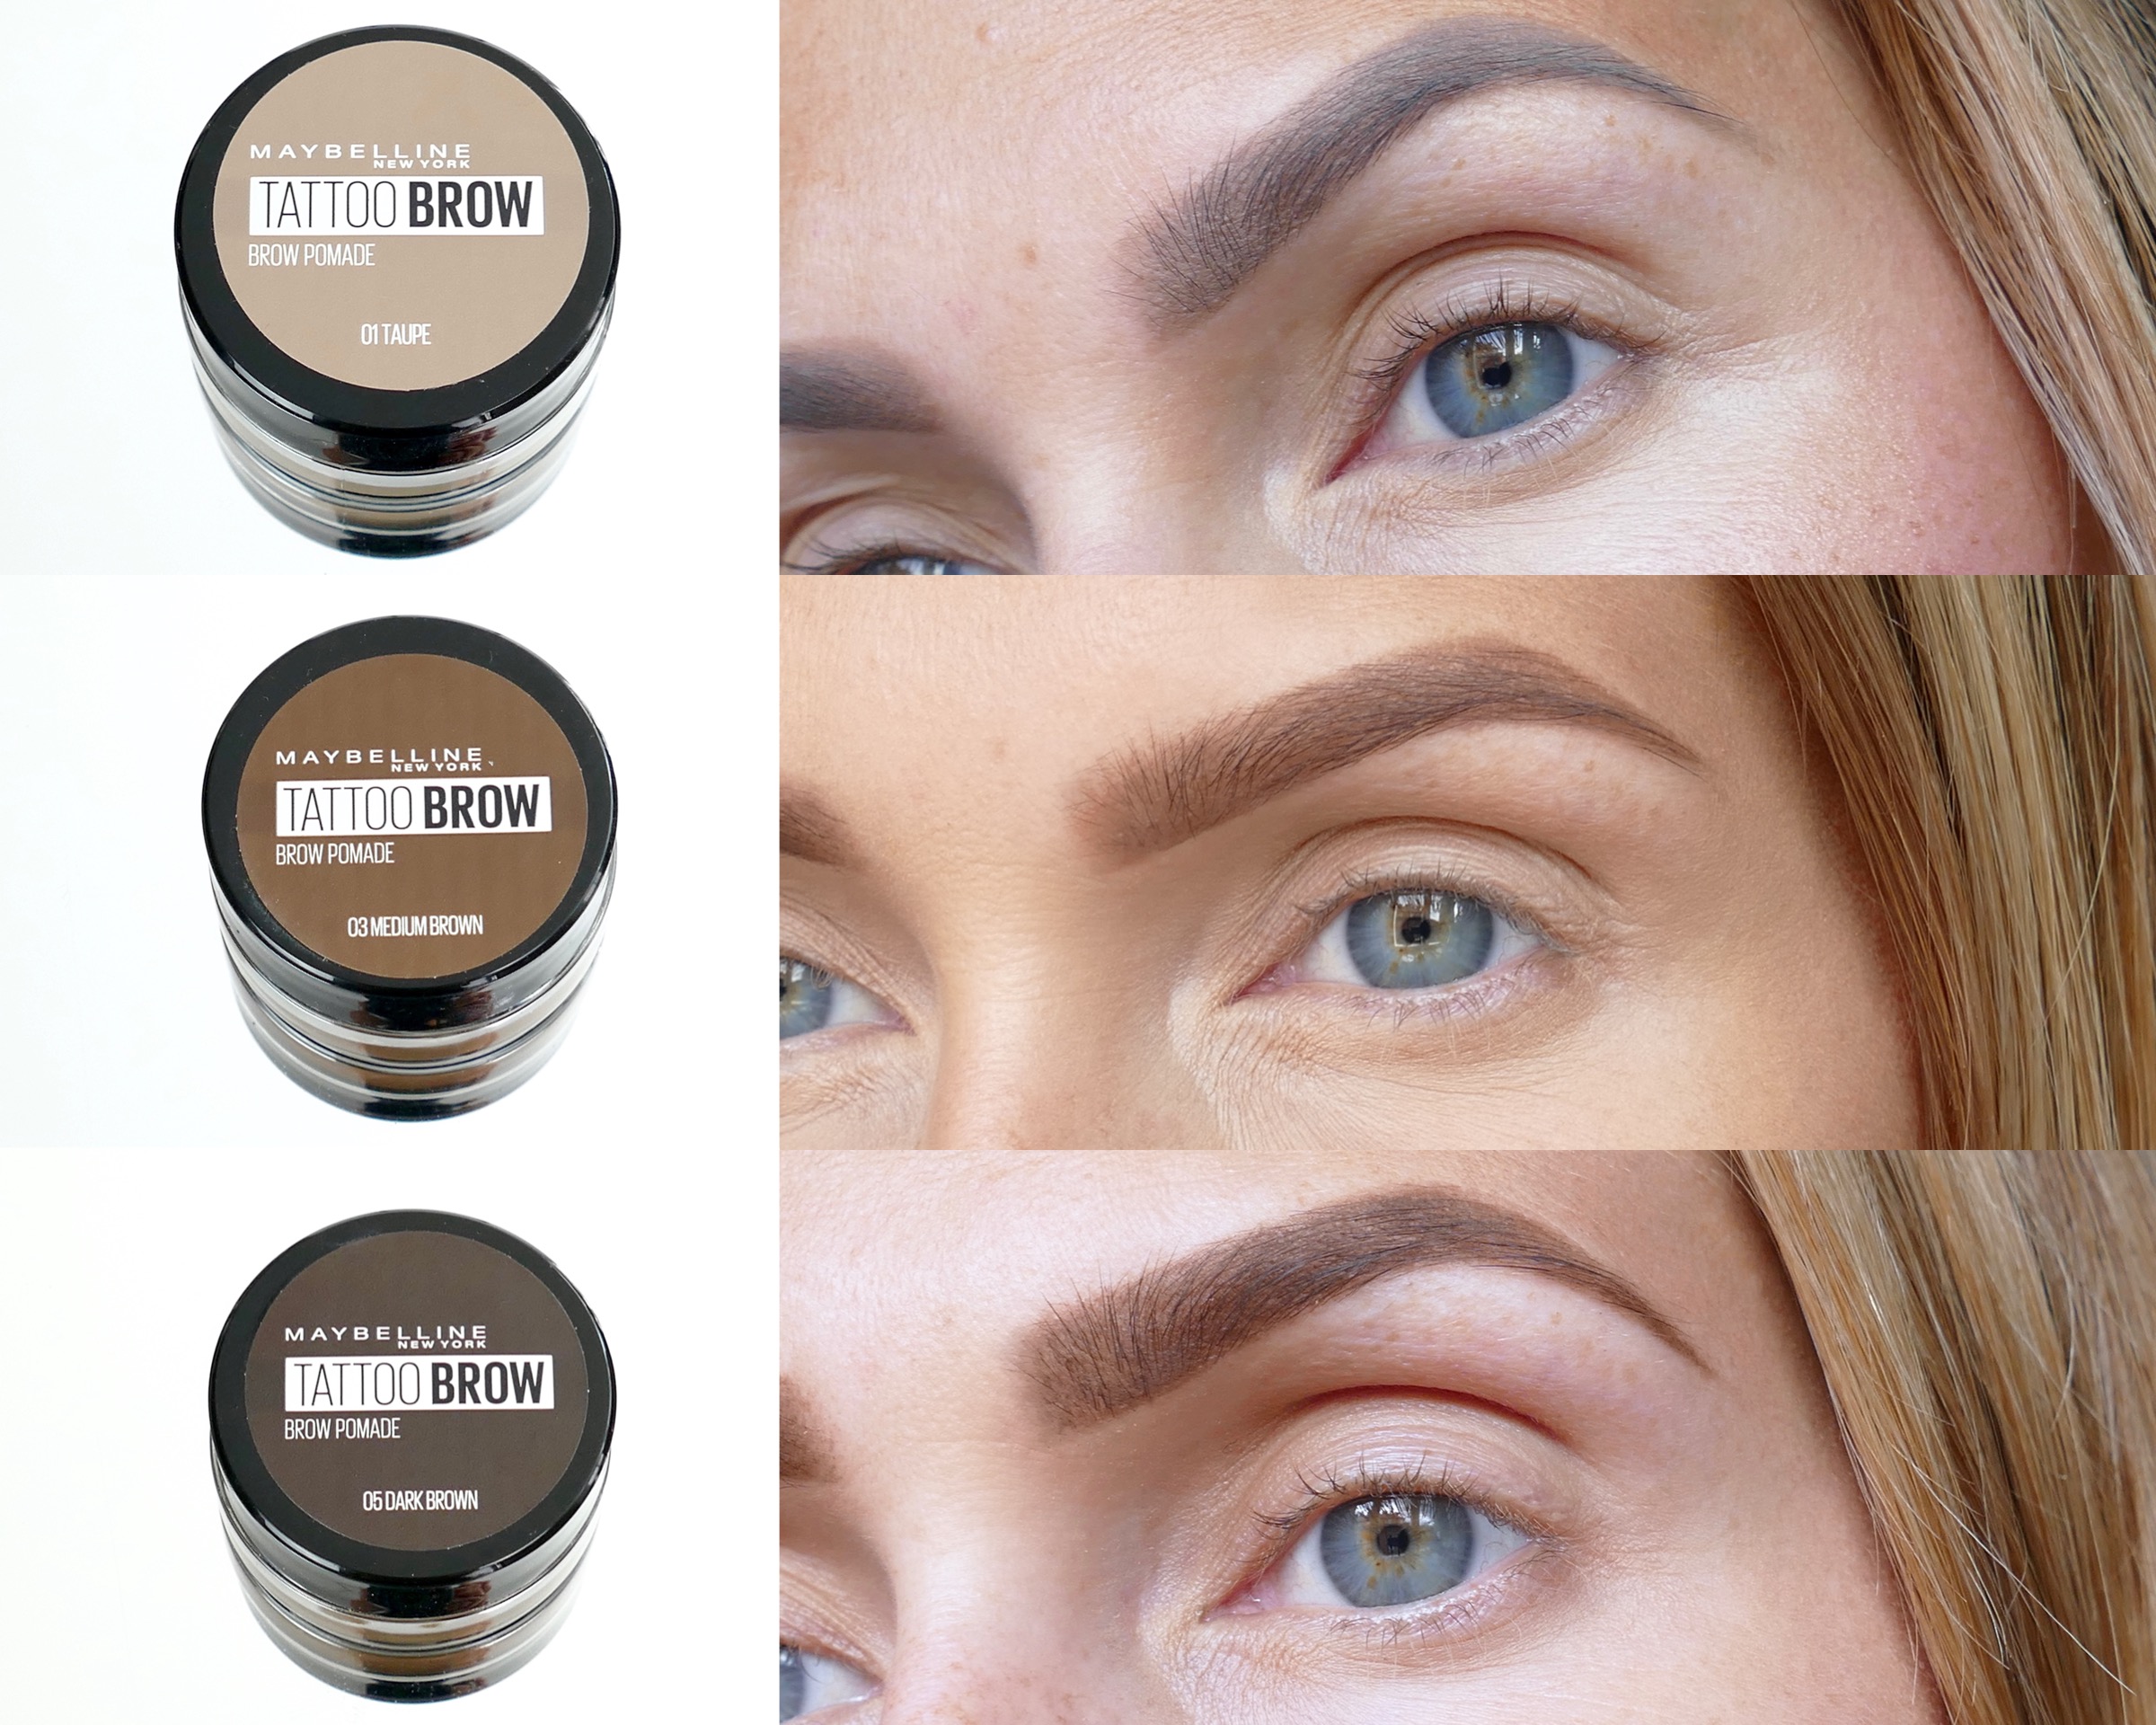 Brow pomade. Maybelline Tattoo Brow Pomade. Maybelline Tattoo Brow Pomade оттенки. Maybelline Brow Pomade свотчи. Помада для бровей Maybelline Tattoo Brow Pomade.